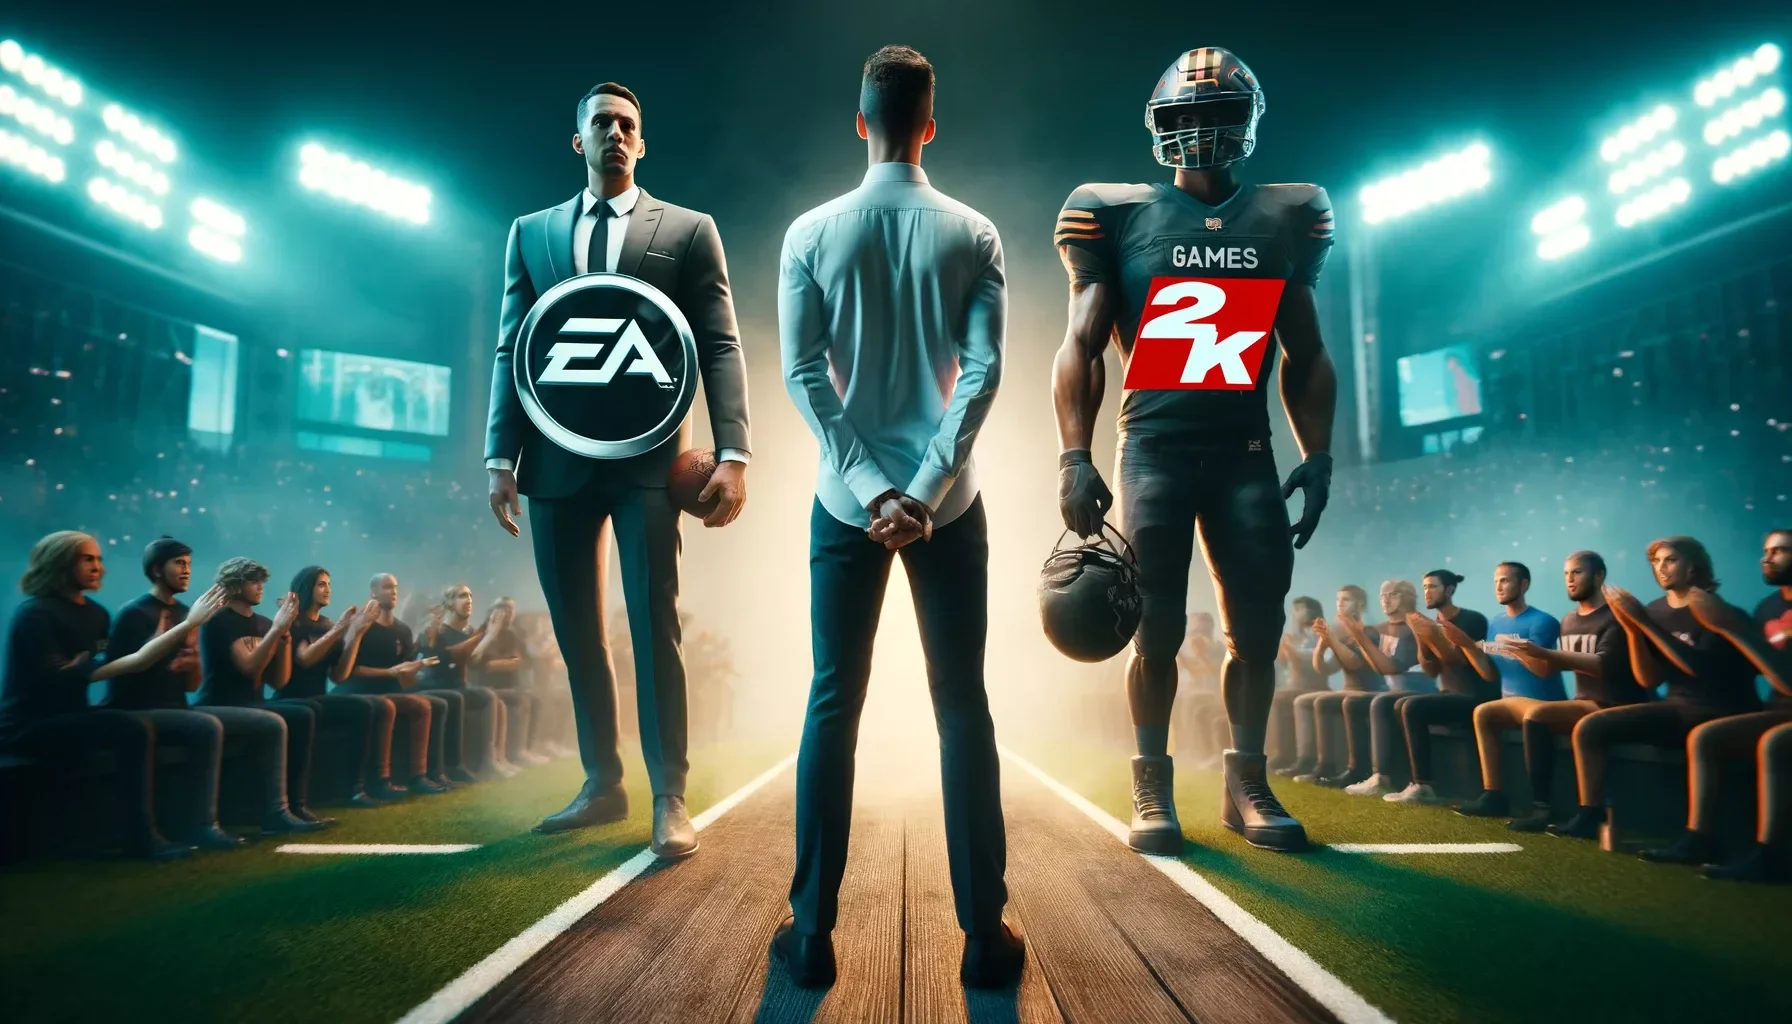 2K Games may become publisher of the next FIFA installments